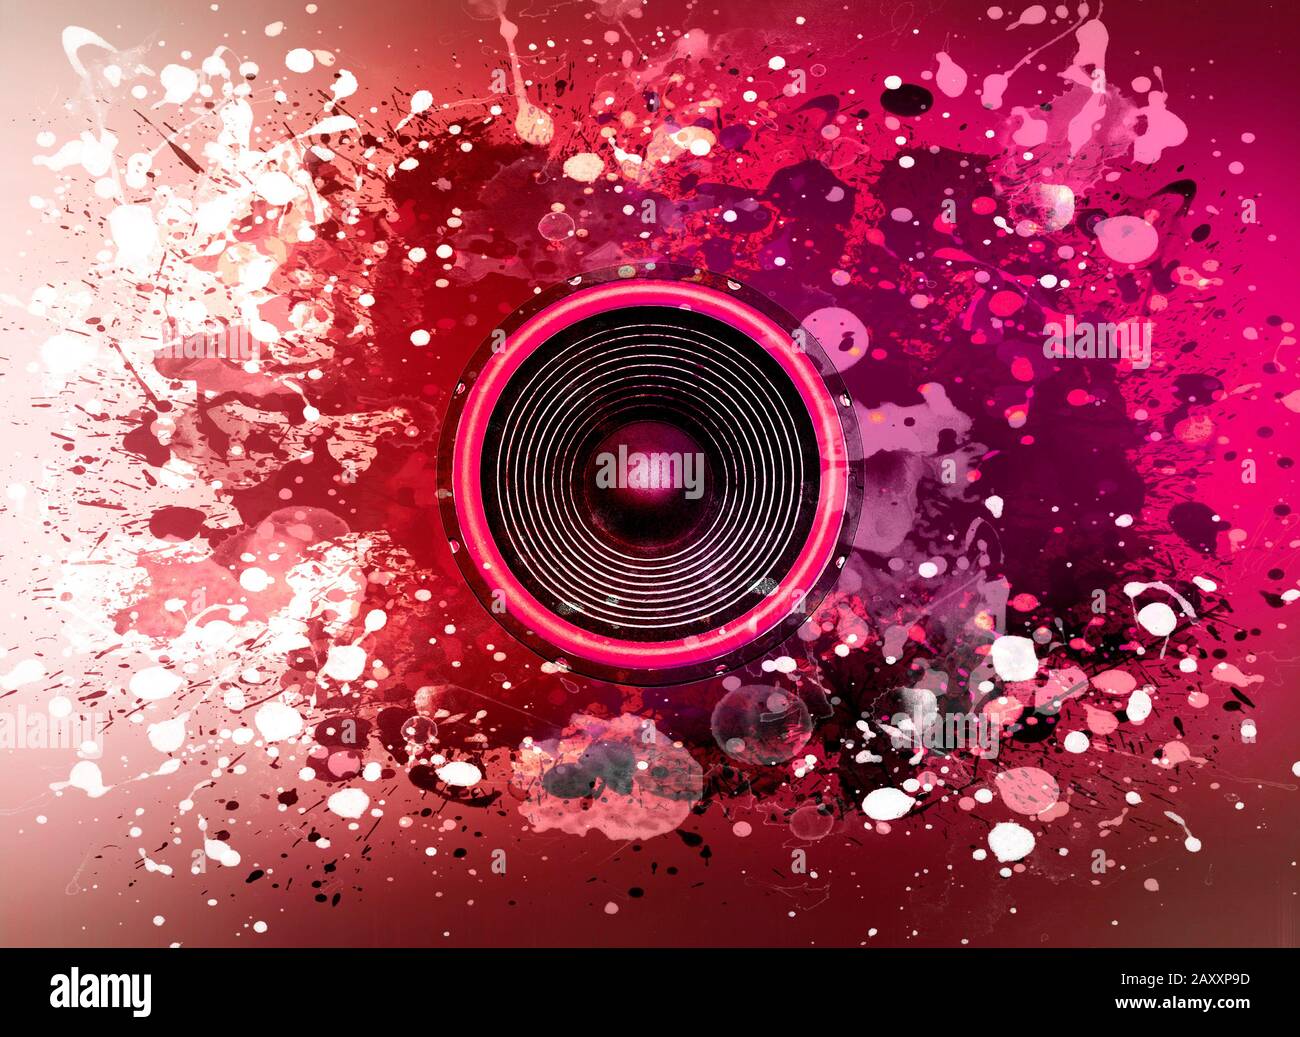 Red and purple audio speaker on a paint splattered background Stock Photo